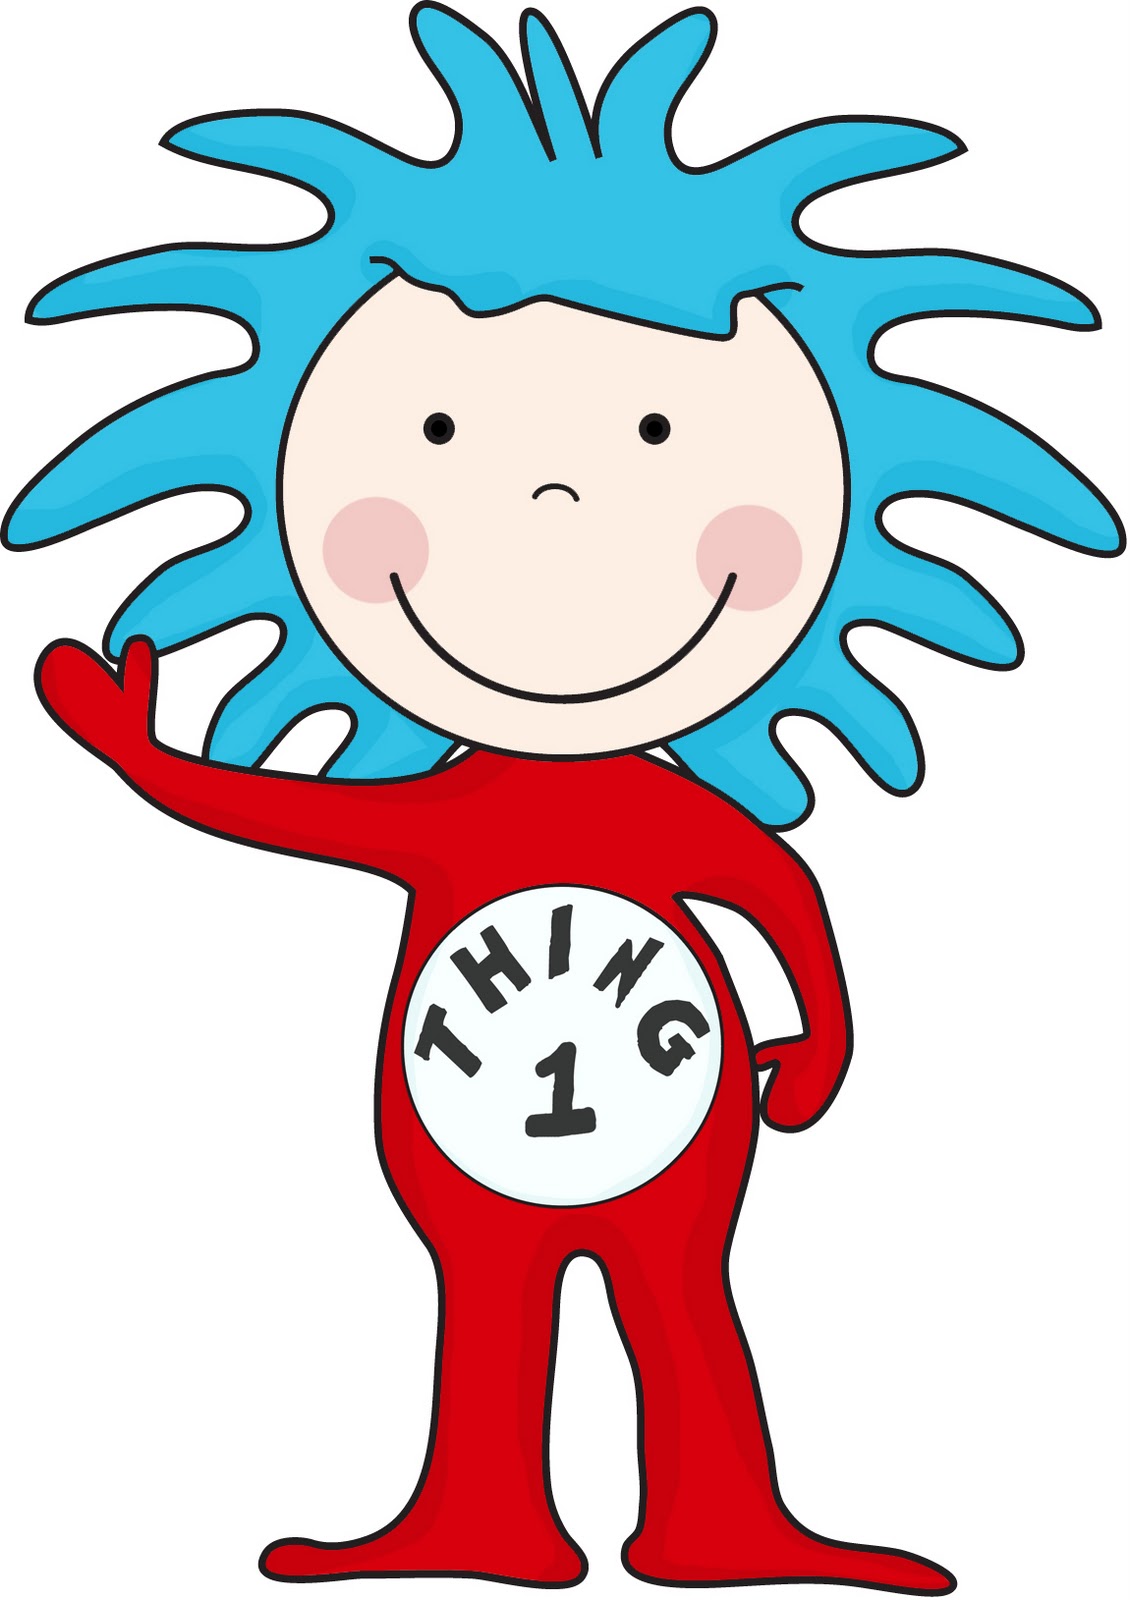 Thing 20clipart Panda Free Images Clipart